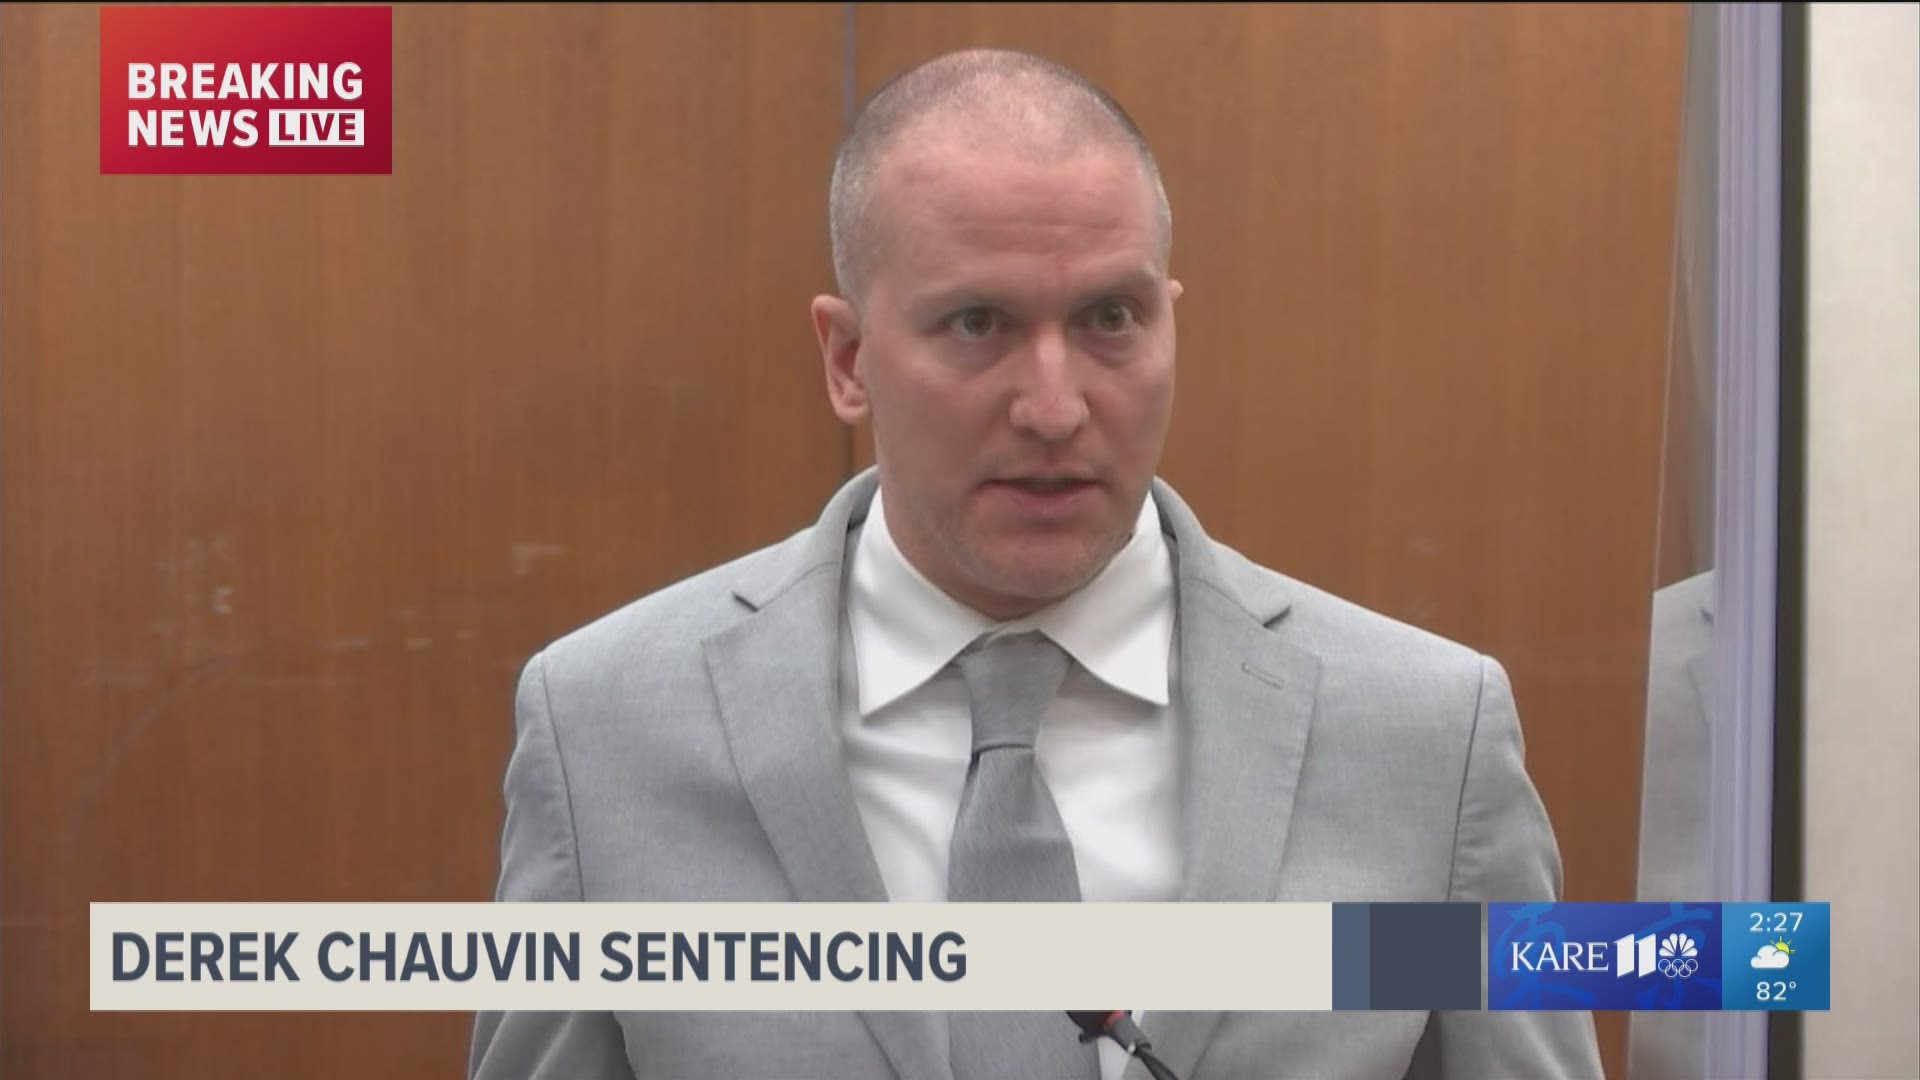 After his attorney argued for a lenient sentence, convicted murderer Derek Chauvin expressed his condolences to the Floyd family, and delivered a cryptic message.